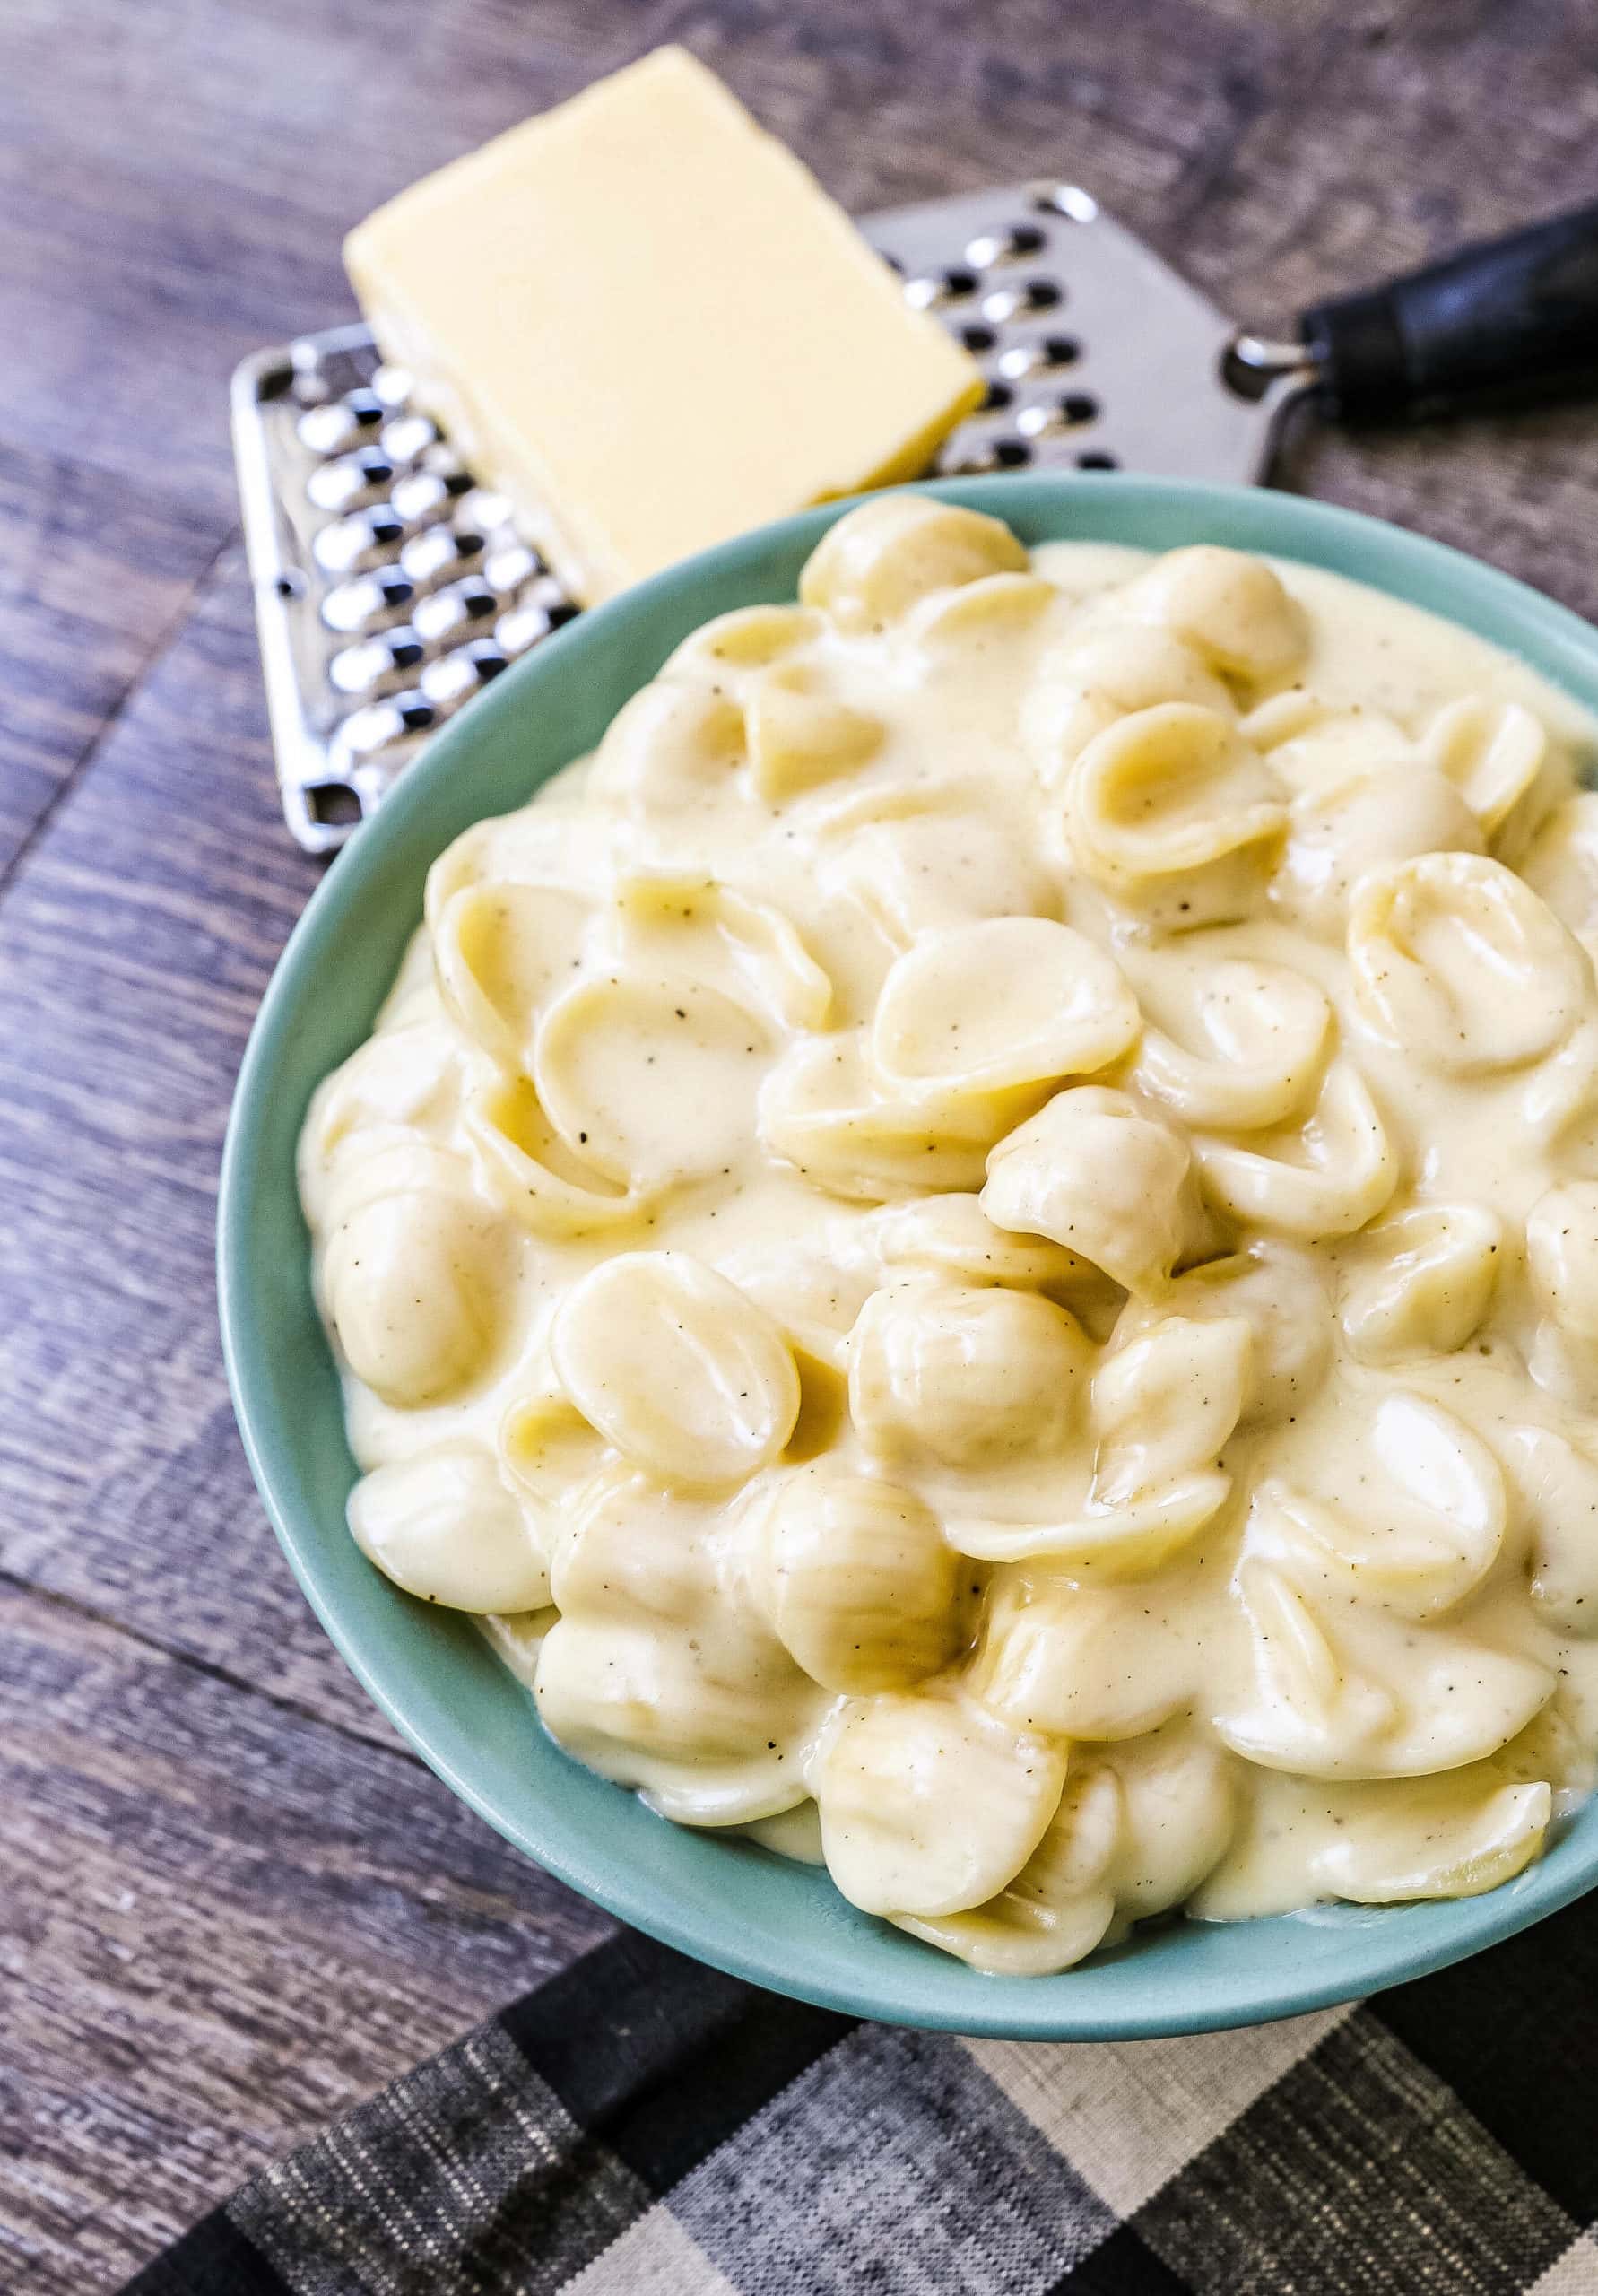 Panera Copycat White Cheddar Macaroni and Cheese The creamiest, richest homemade white cheddar macaroni and cheese. This is one of Panera's most popular recipes and now you can make a copycat recipe at home!